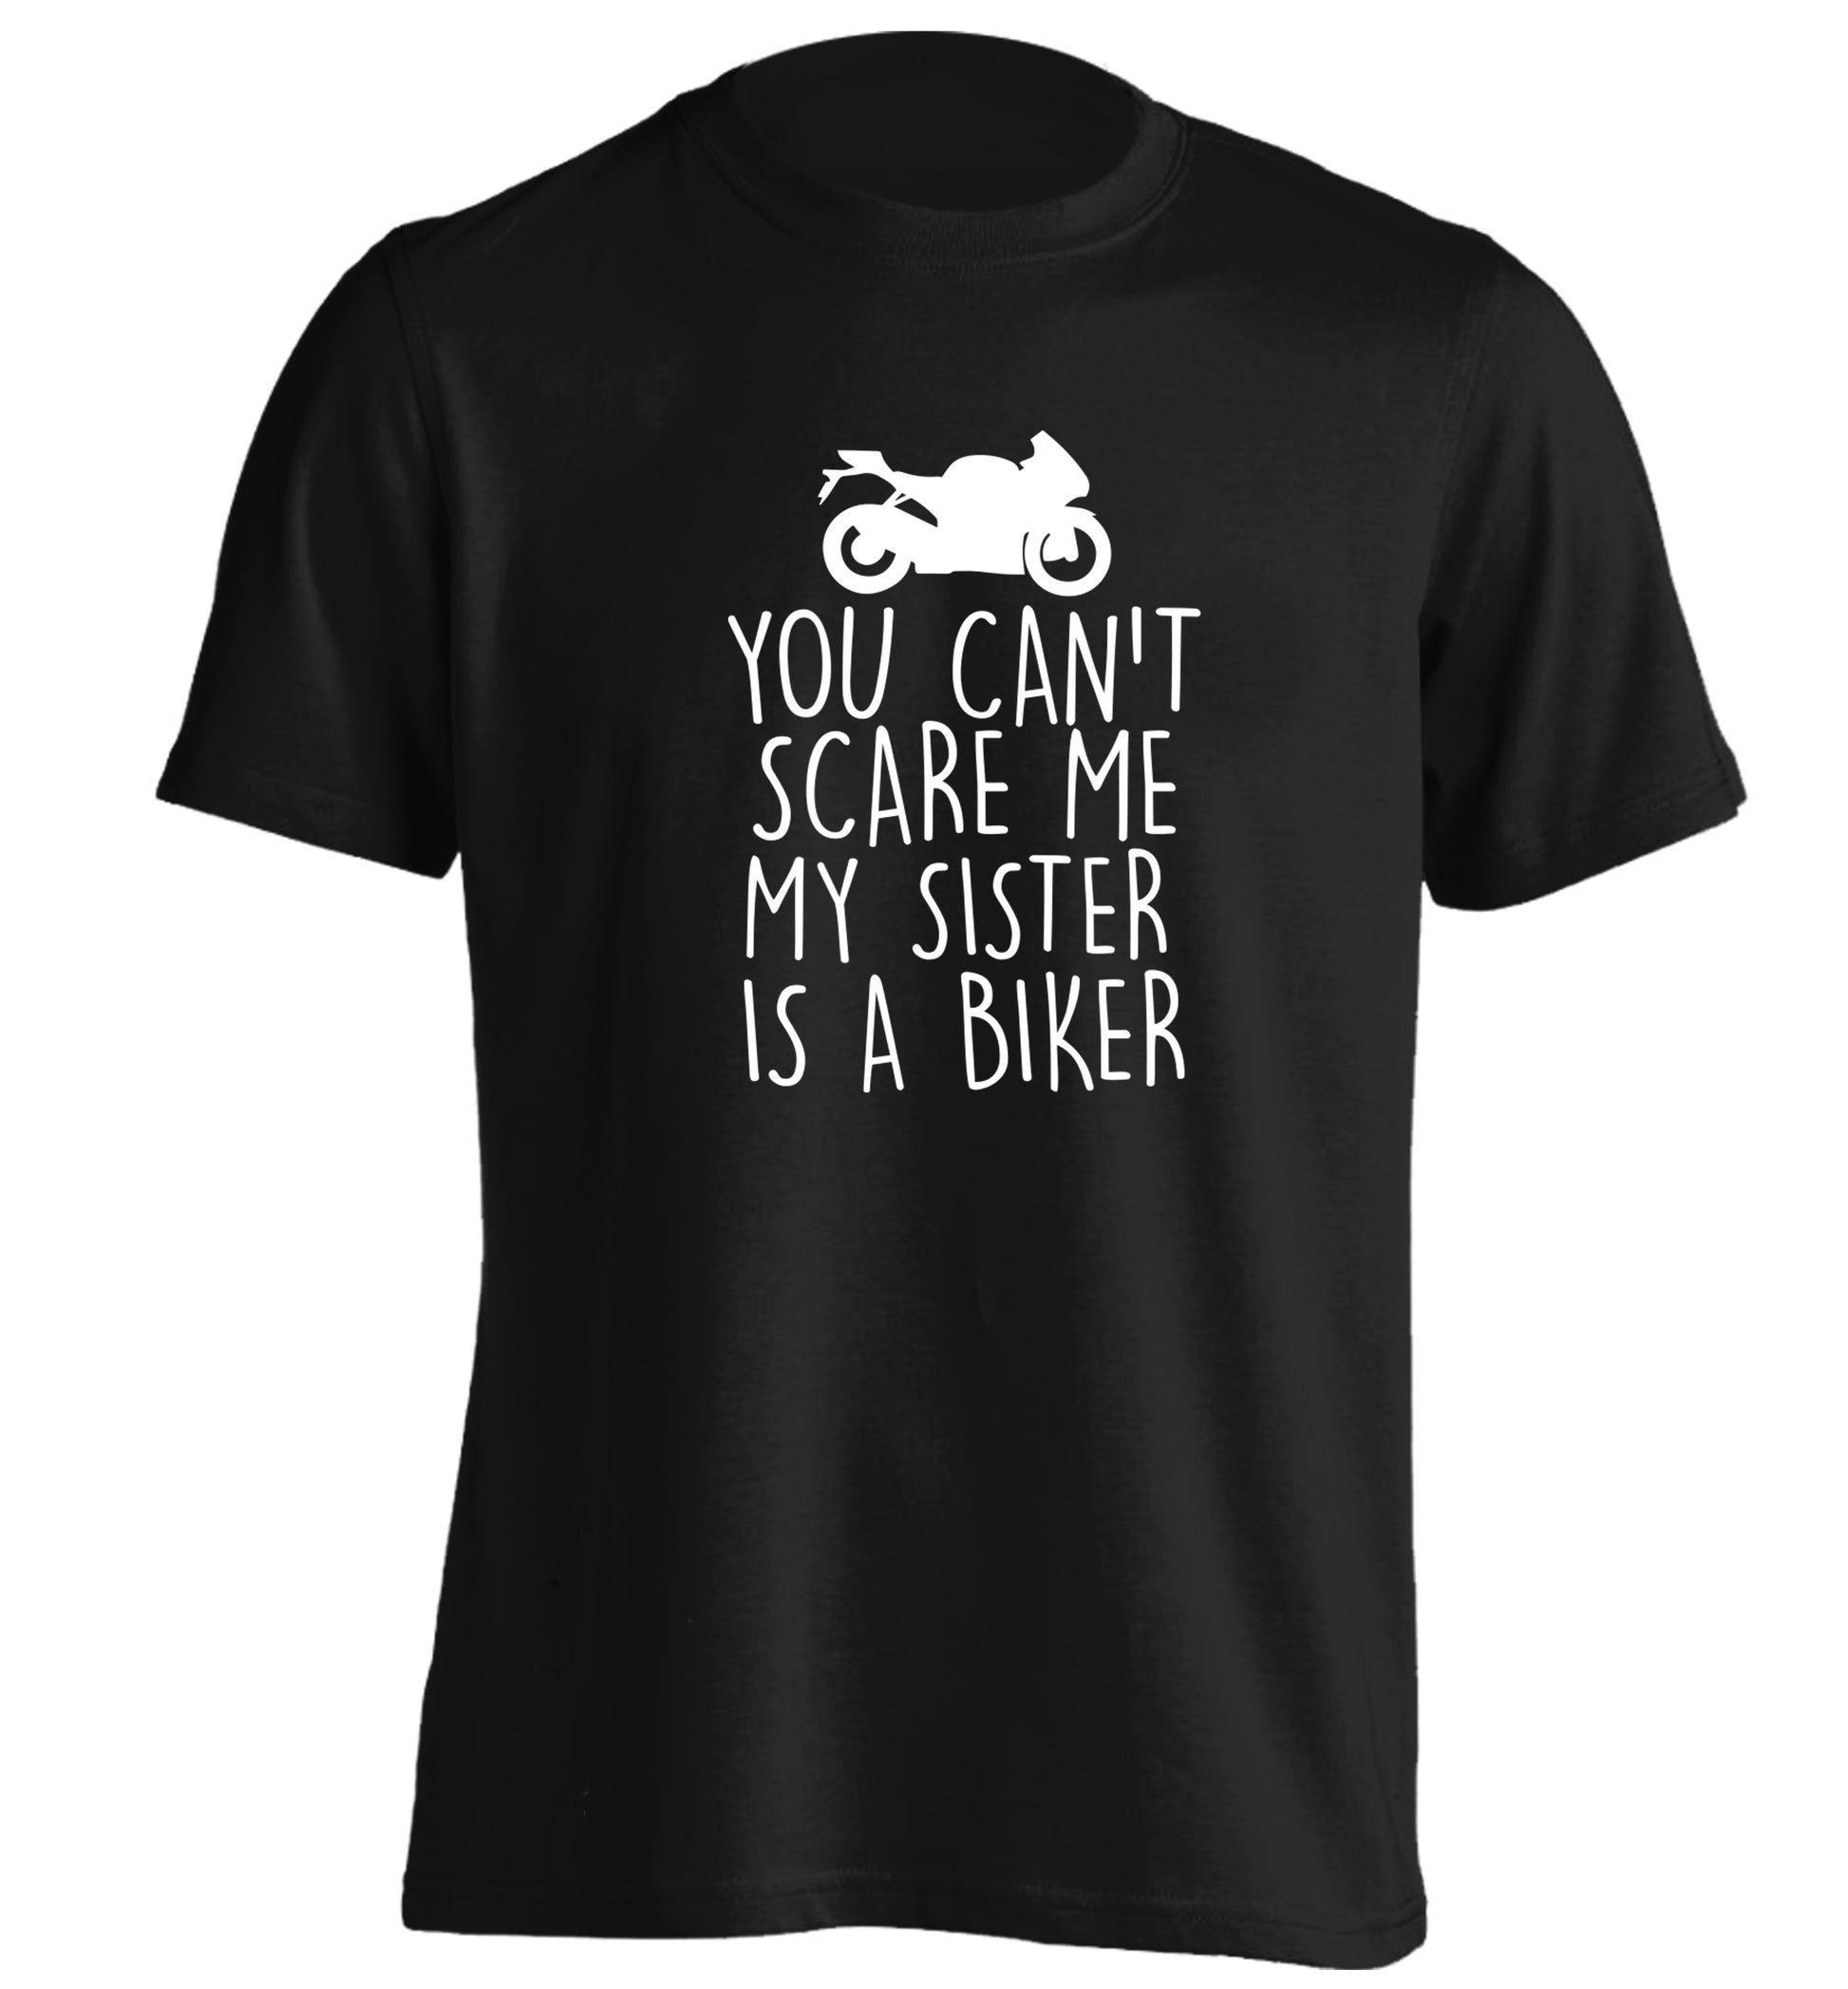 You can't scare me my sister is a biker adults unisex black Tshirt 2XL